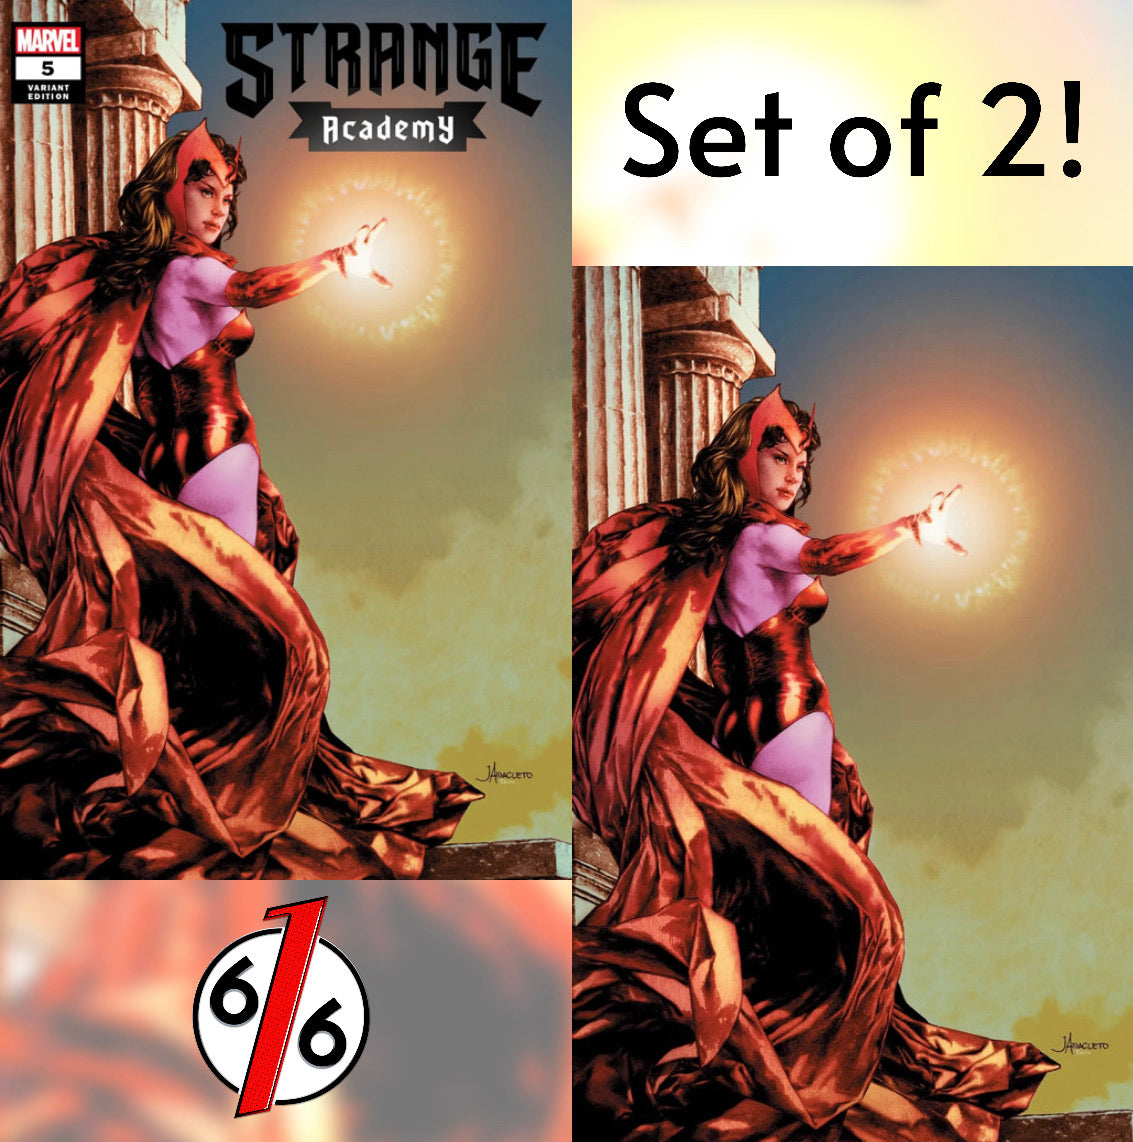 🔥🚨 STRANGE ACADEMY #5 JAY ANACLETO SET OF 2 Scarlet Witch Exclusive Variant NM